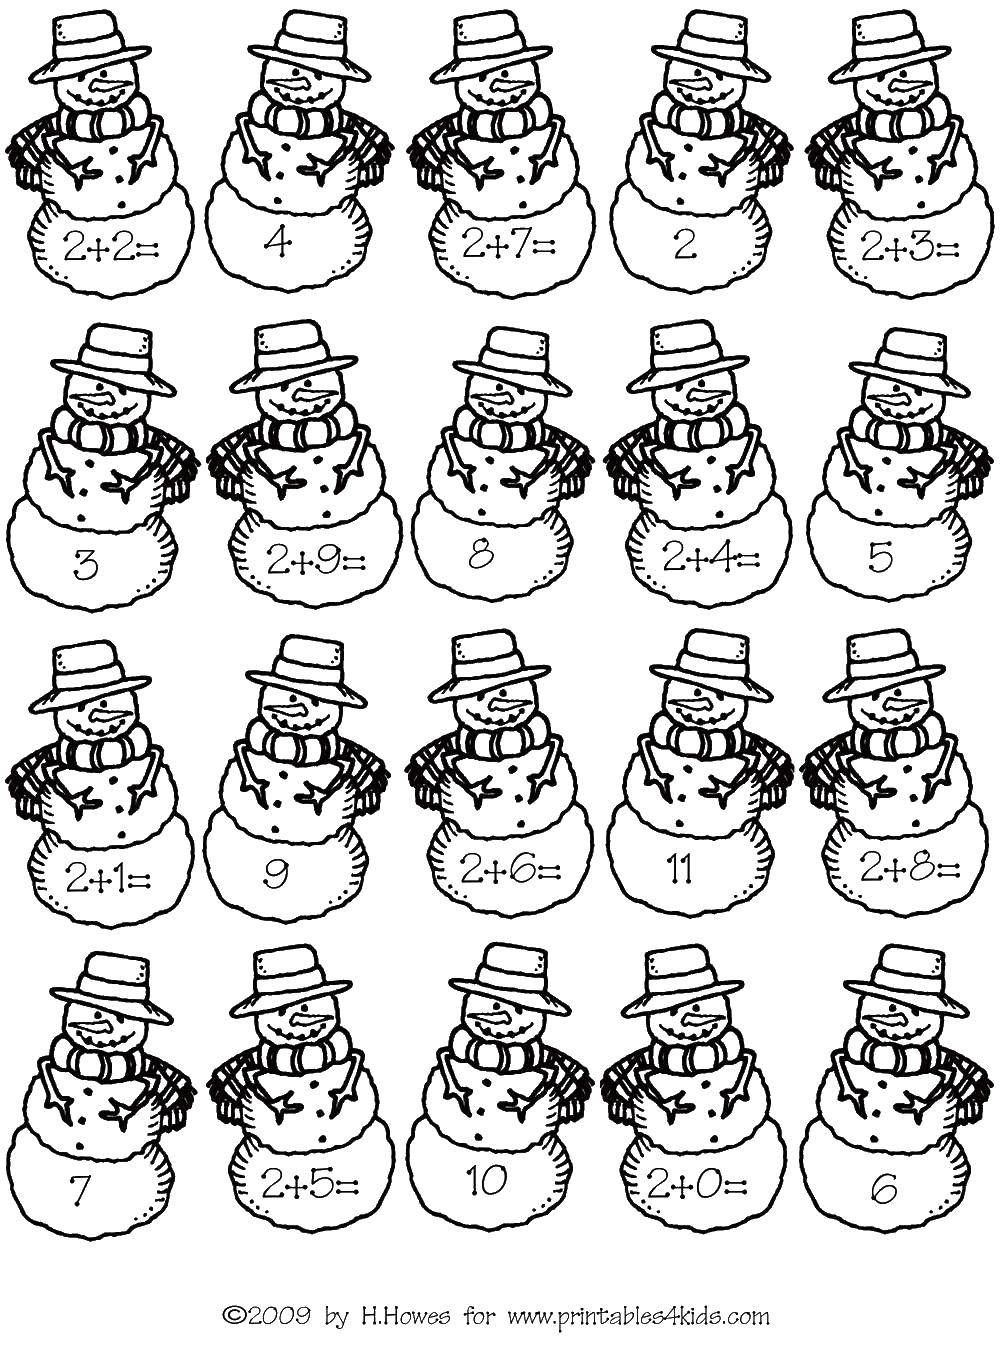 Coloring Decide examples of snowmen. Category mathematical coloring pages. Tags:  Math, counting, logic.